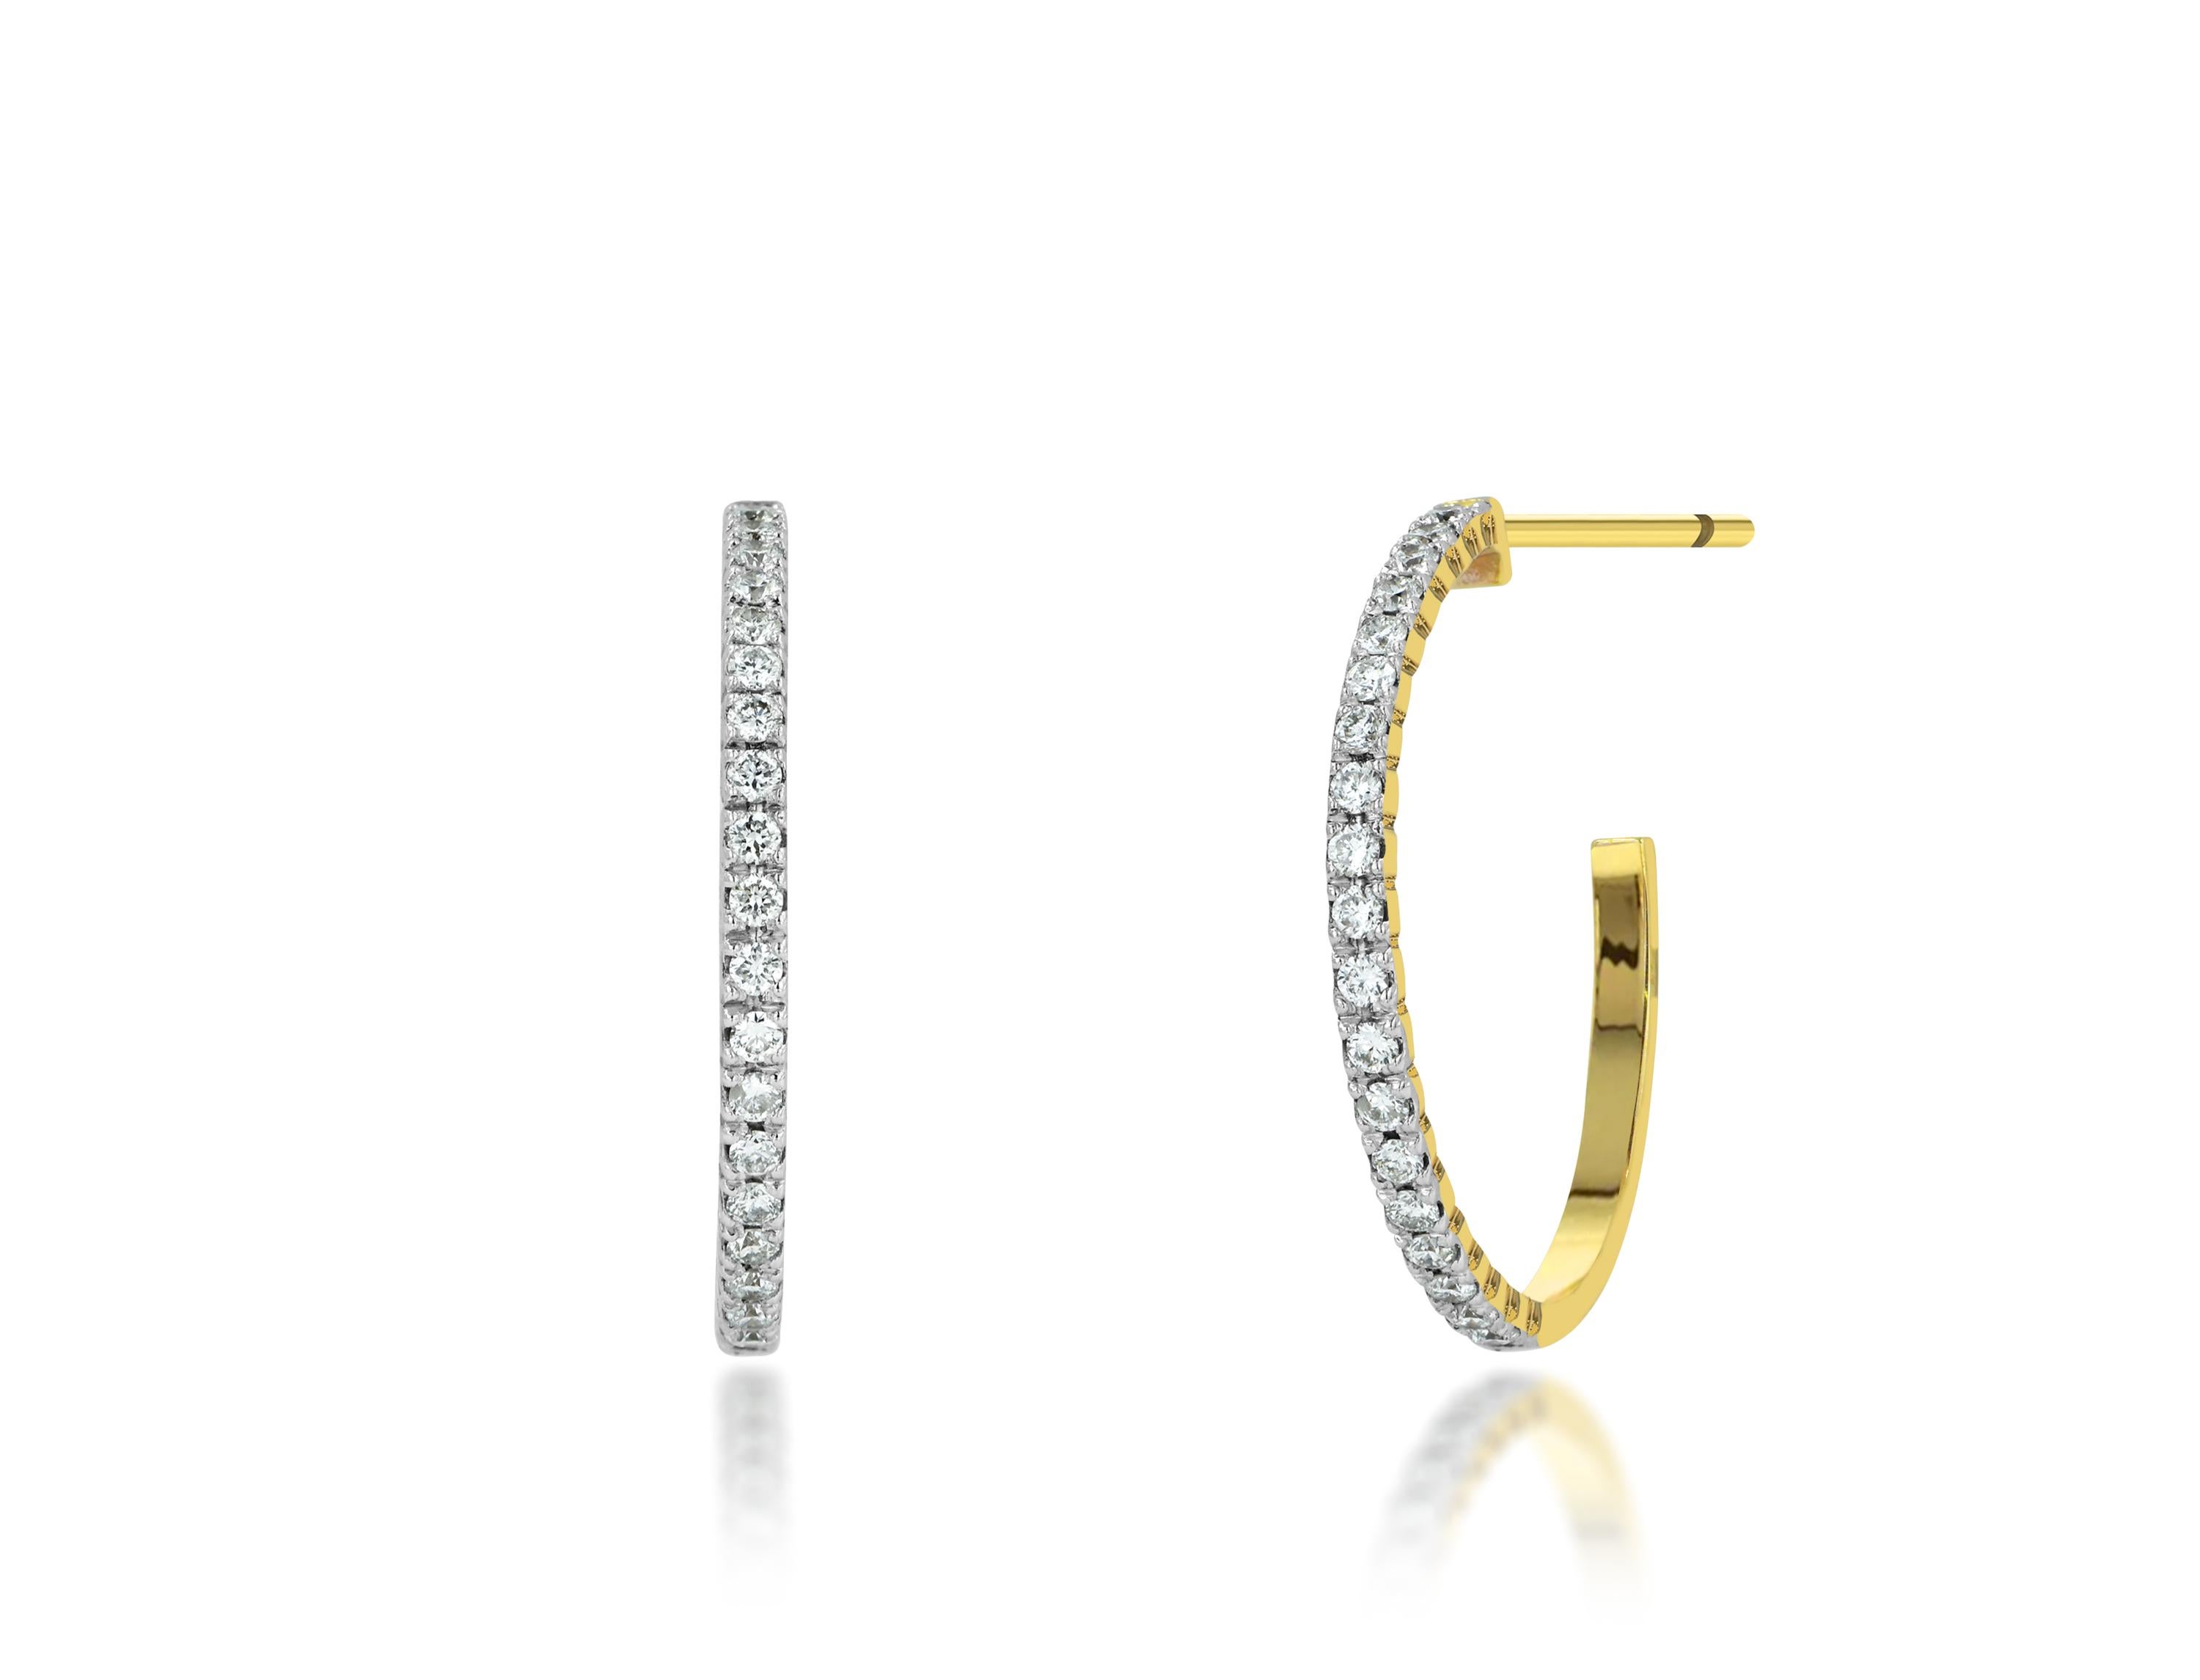 Natural Diamond Hoop Earrings are made of 14K solid gold available in three colors of gold,  Rose Gold / Yellow Gold / White Gold.

Perfect to wear anytime or day to day wearing they will go with everything a must have pair of half hoop. Easy to